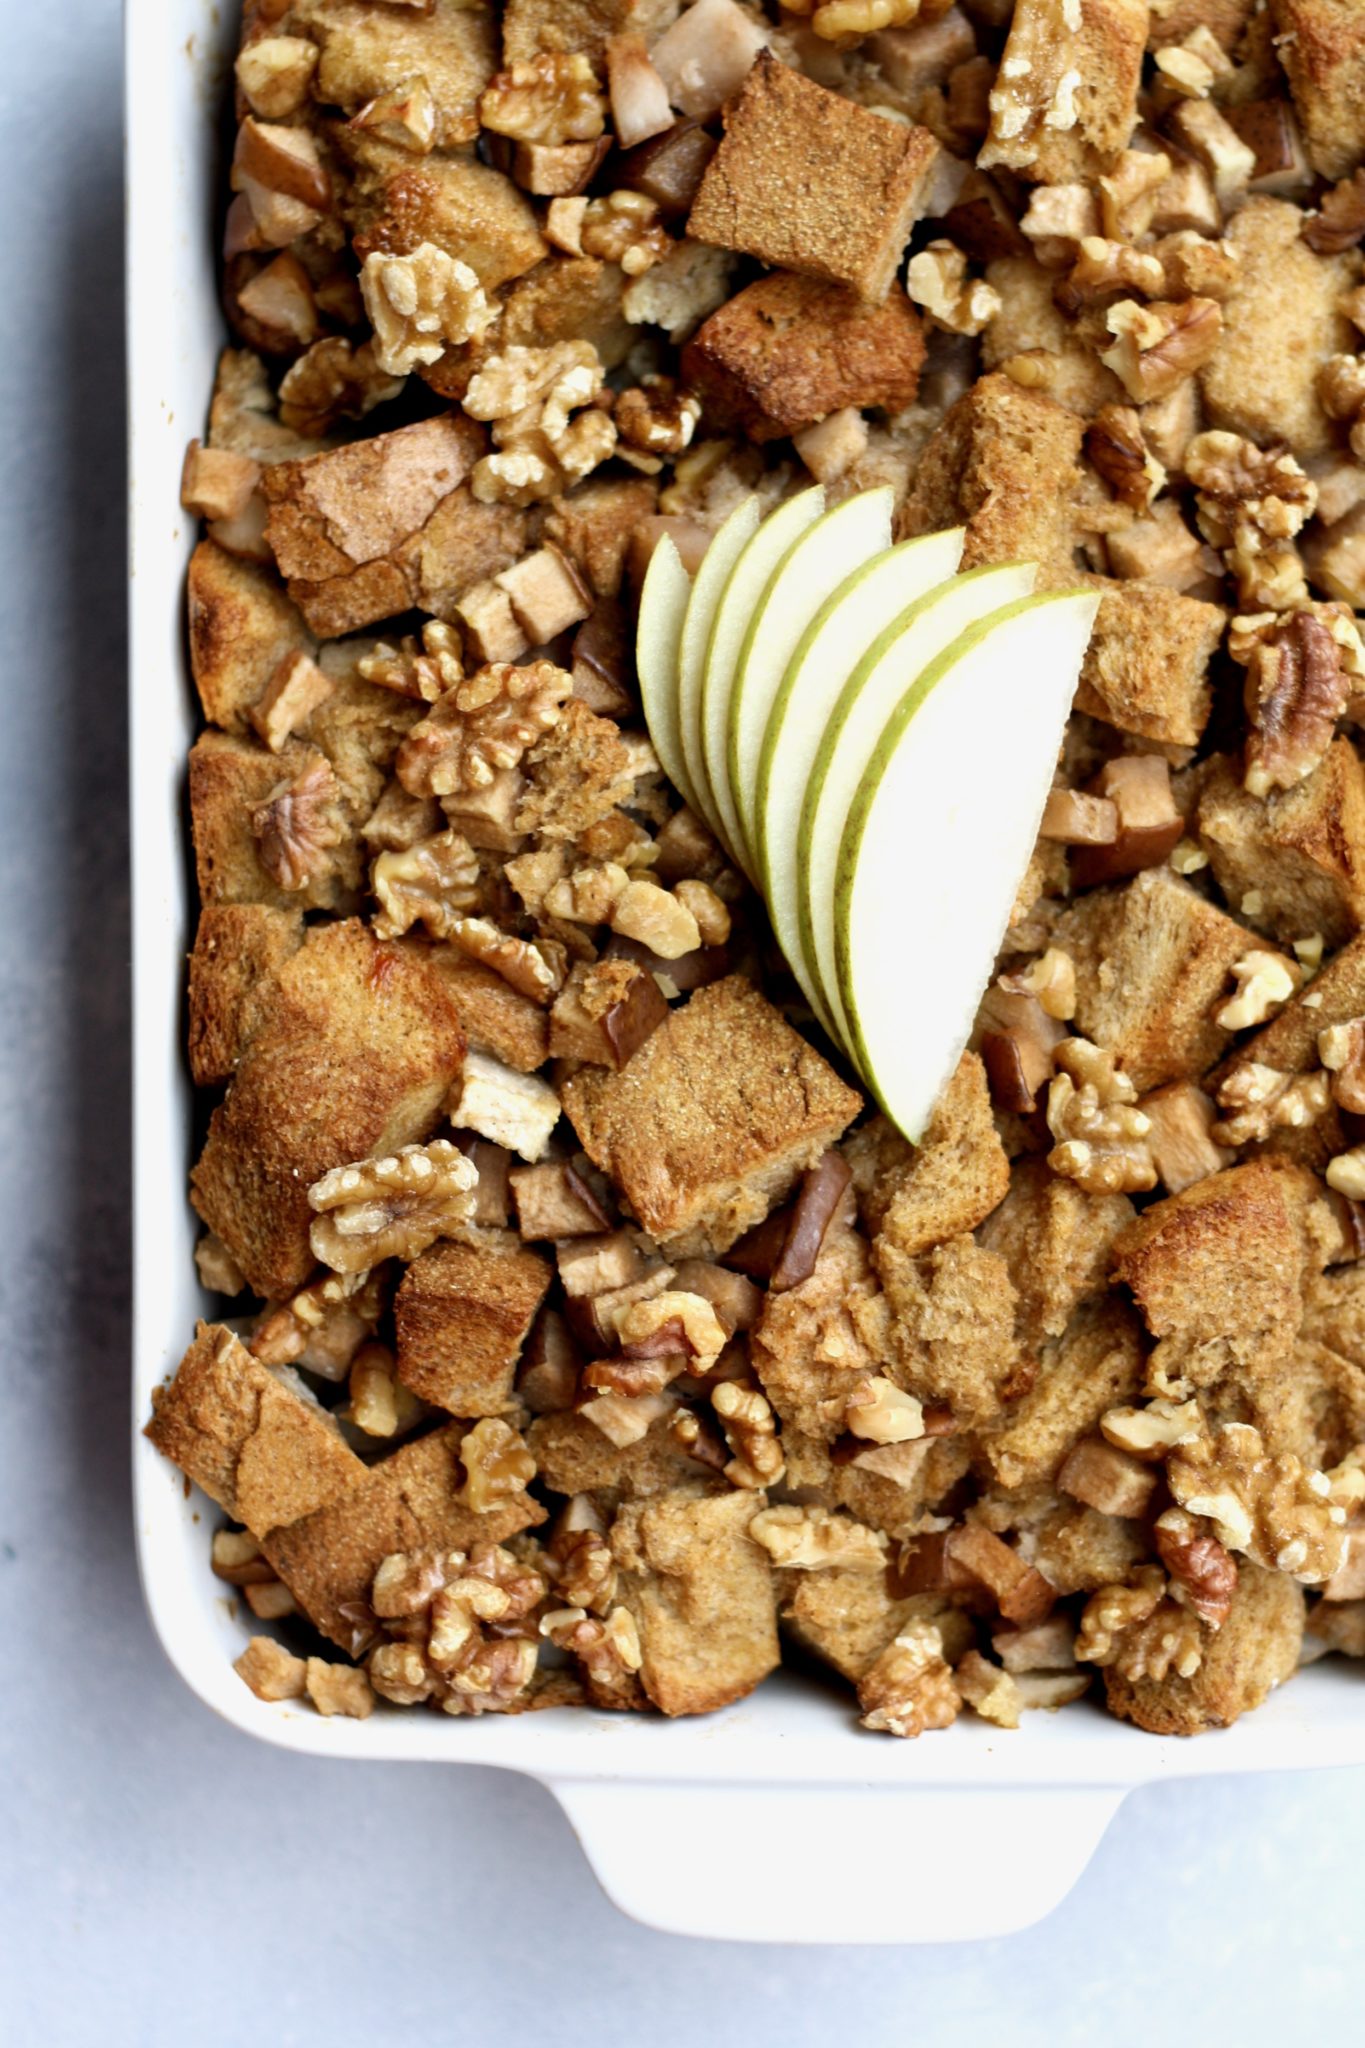 cardamom & cinnamon pear baked french toast with walnuts // cait's plate